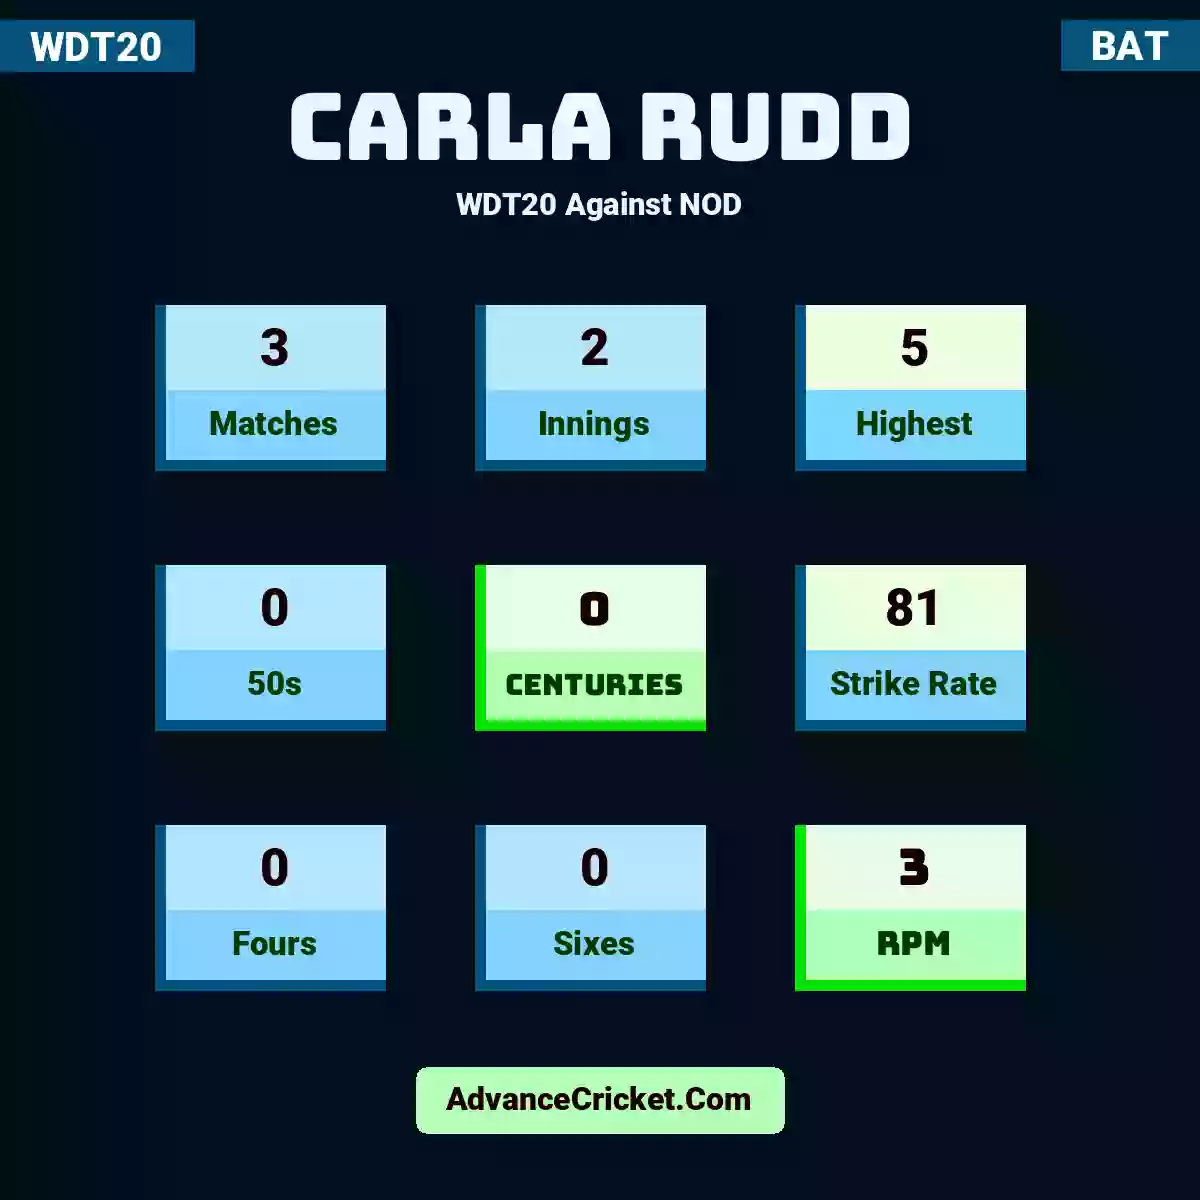 Carla Rudd WDT20  Against NOD, Carla Rudd played 3 matches, scored 5 runs as highest, 0 half-centuries, and 0 centuries, with a strike rate of 81. C.Rudd hit 0 fours and 0 sixes, with an RPM of 3.